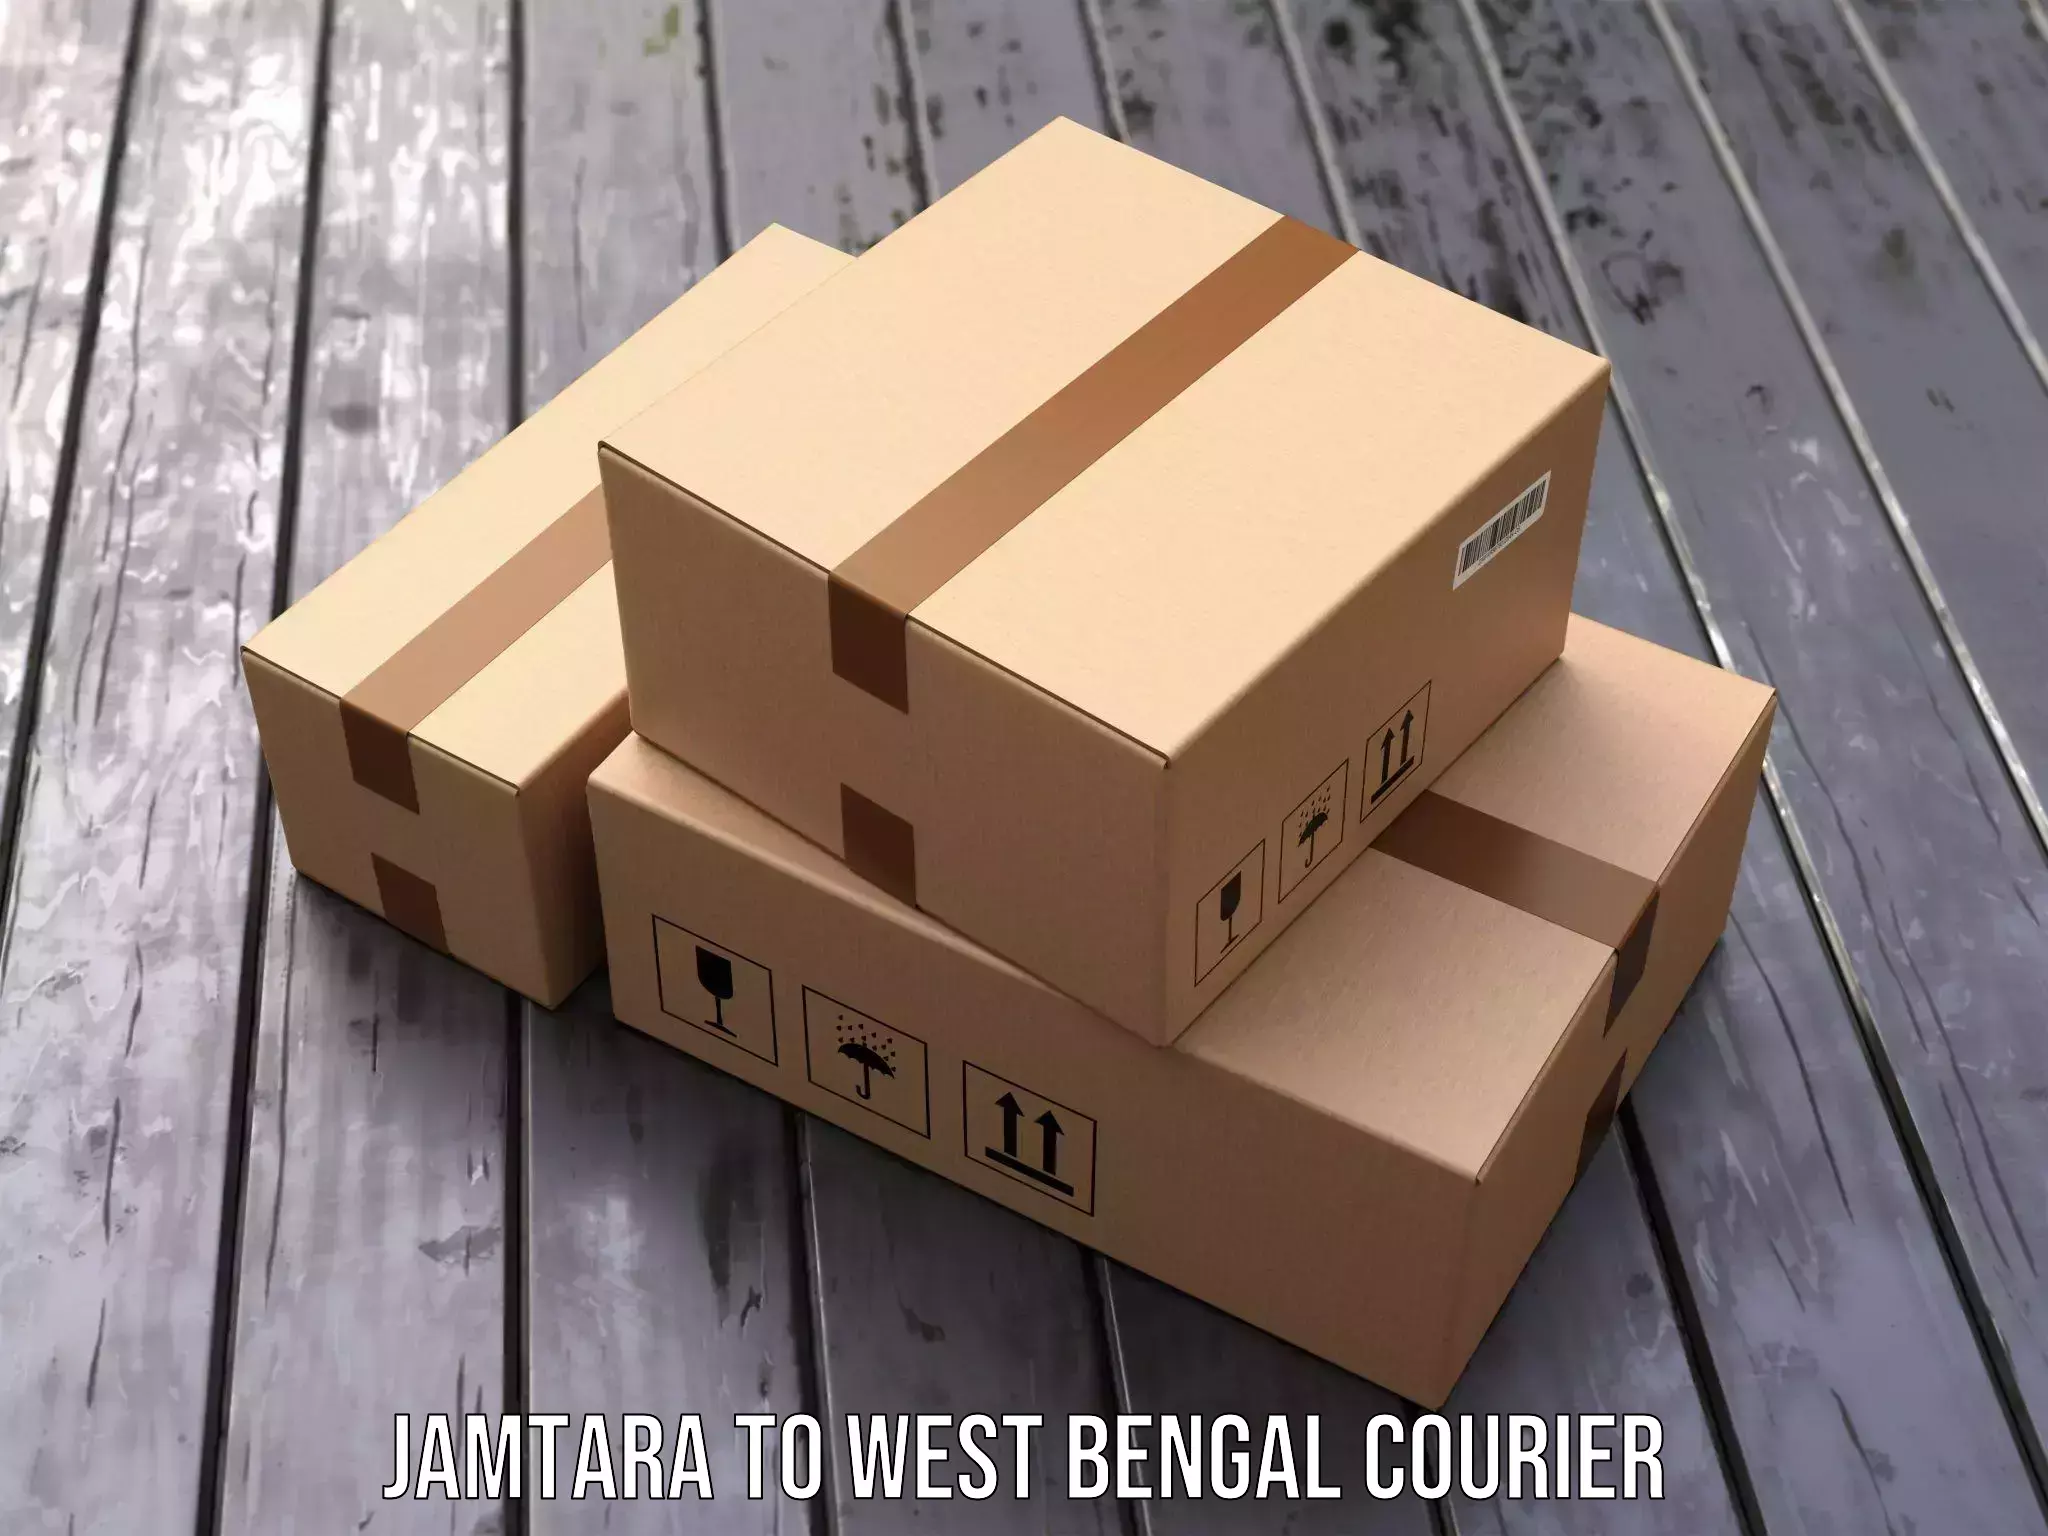 Express mail service in Jamtara to Hooghly